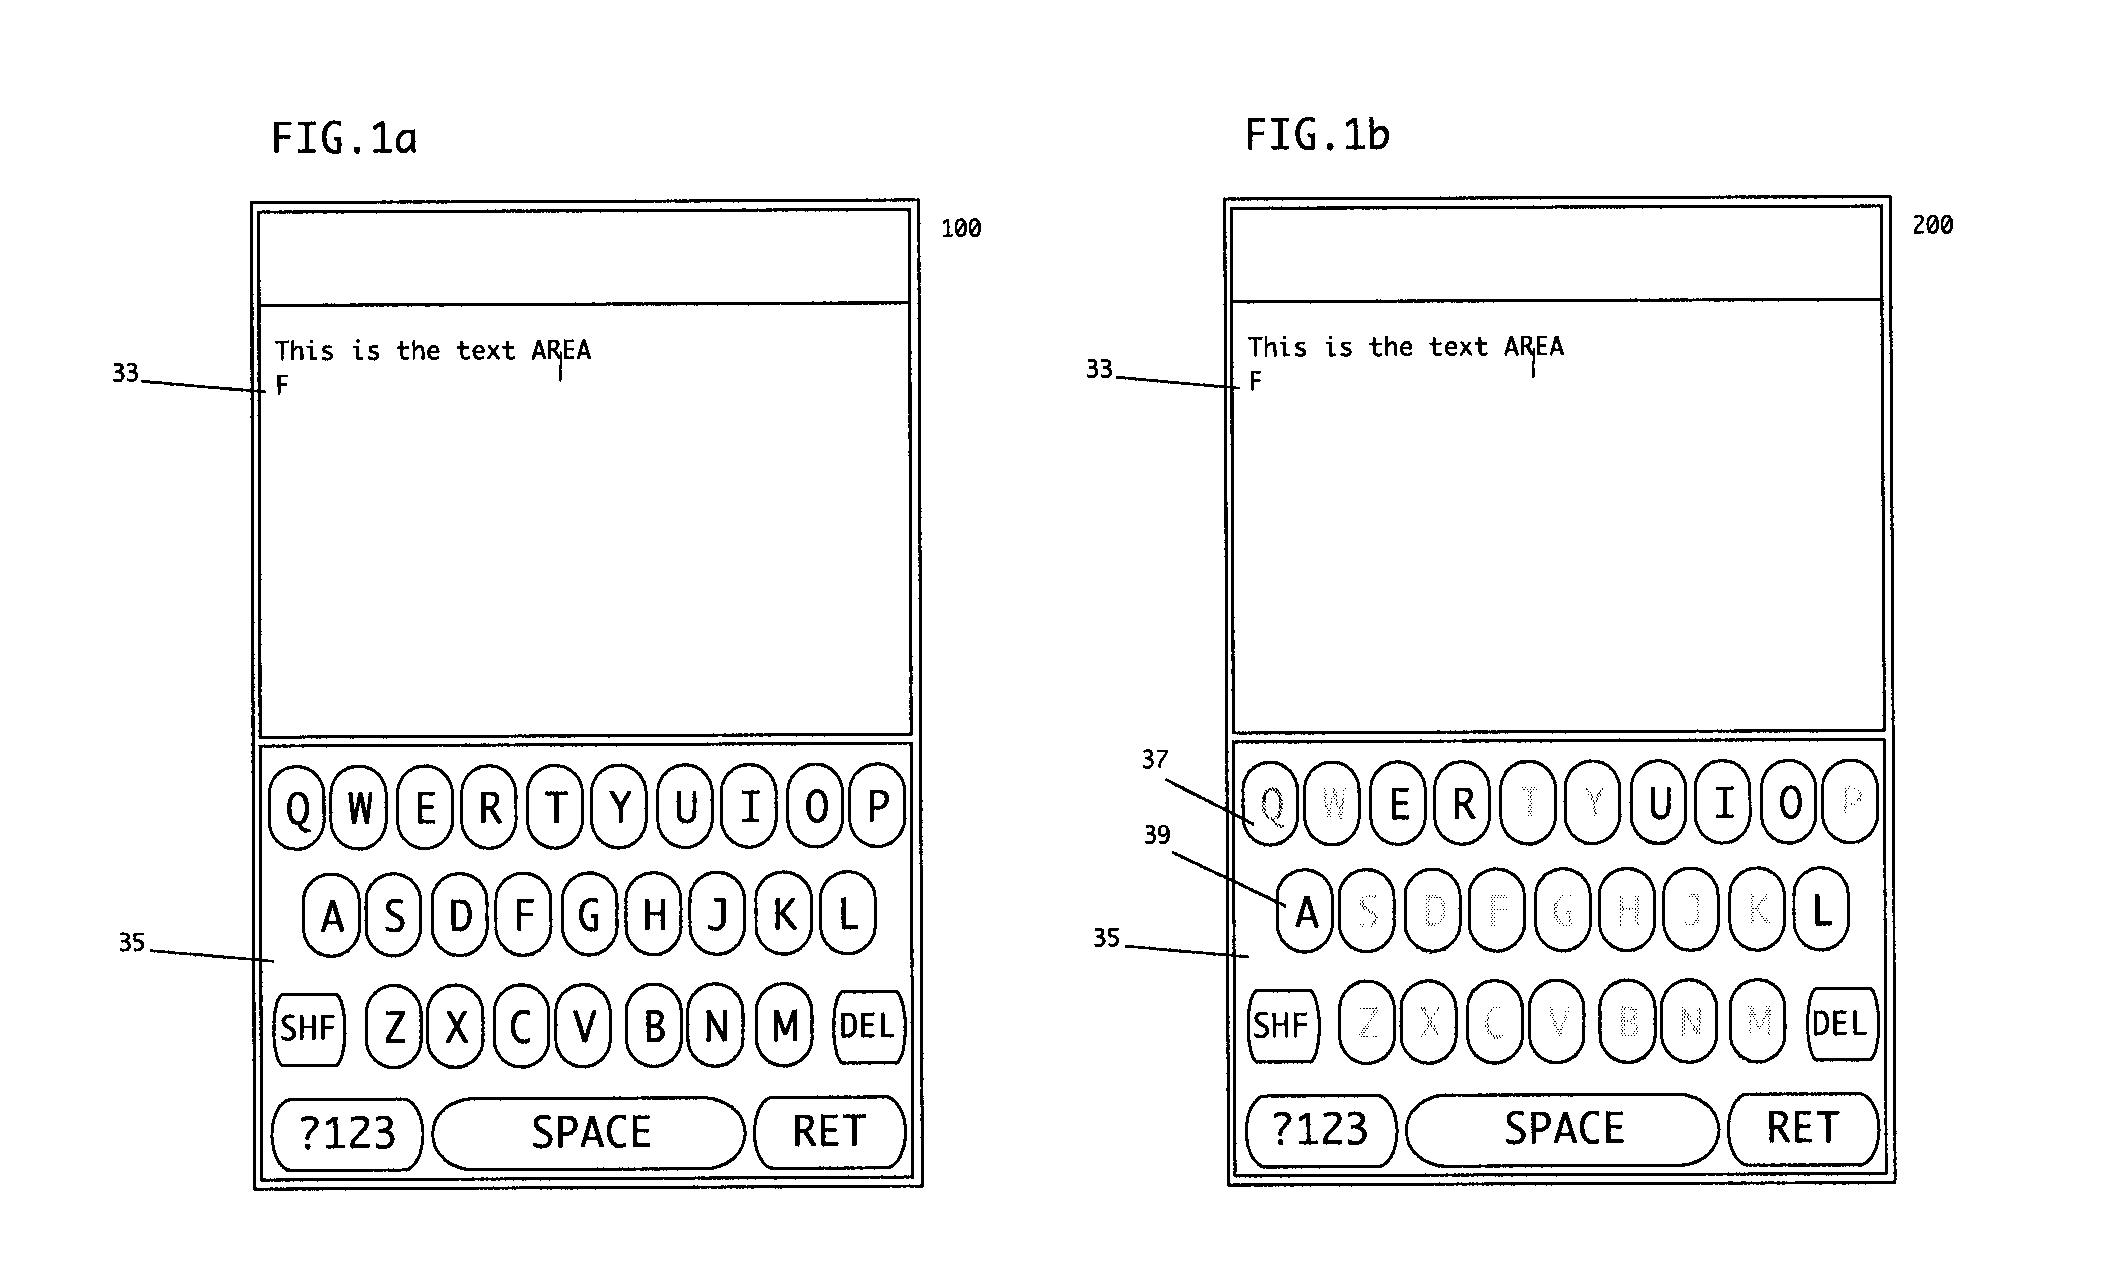 Methods of and systems for reducing keyboard data entry errors